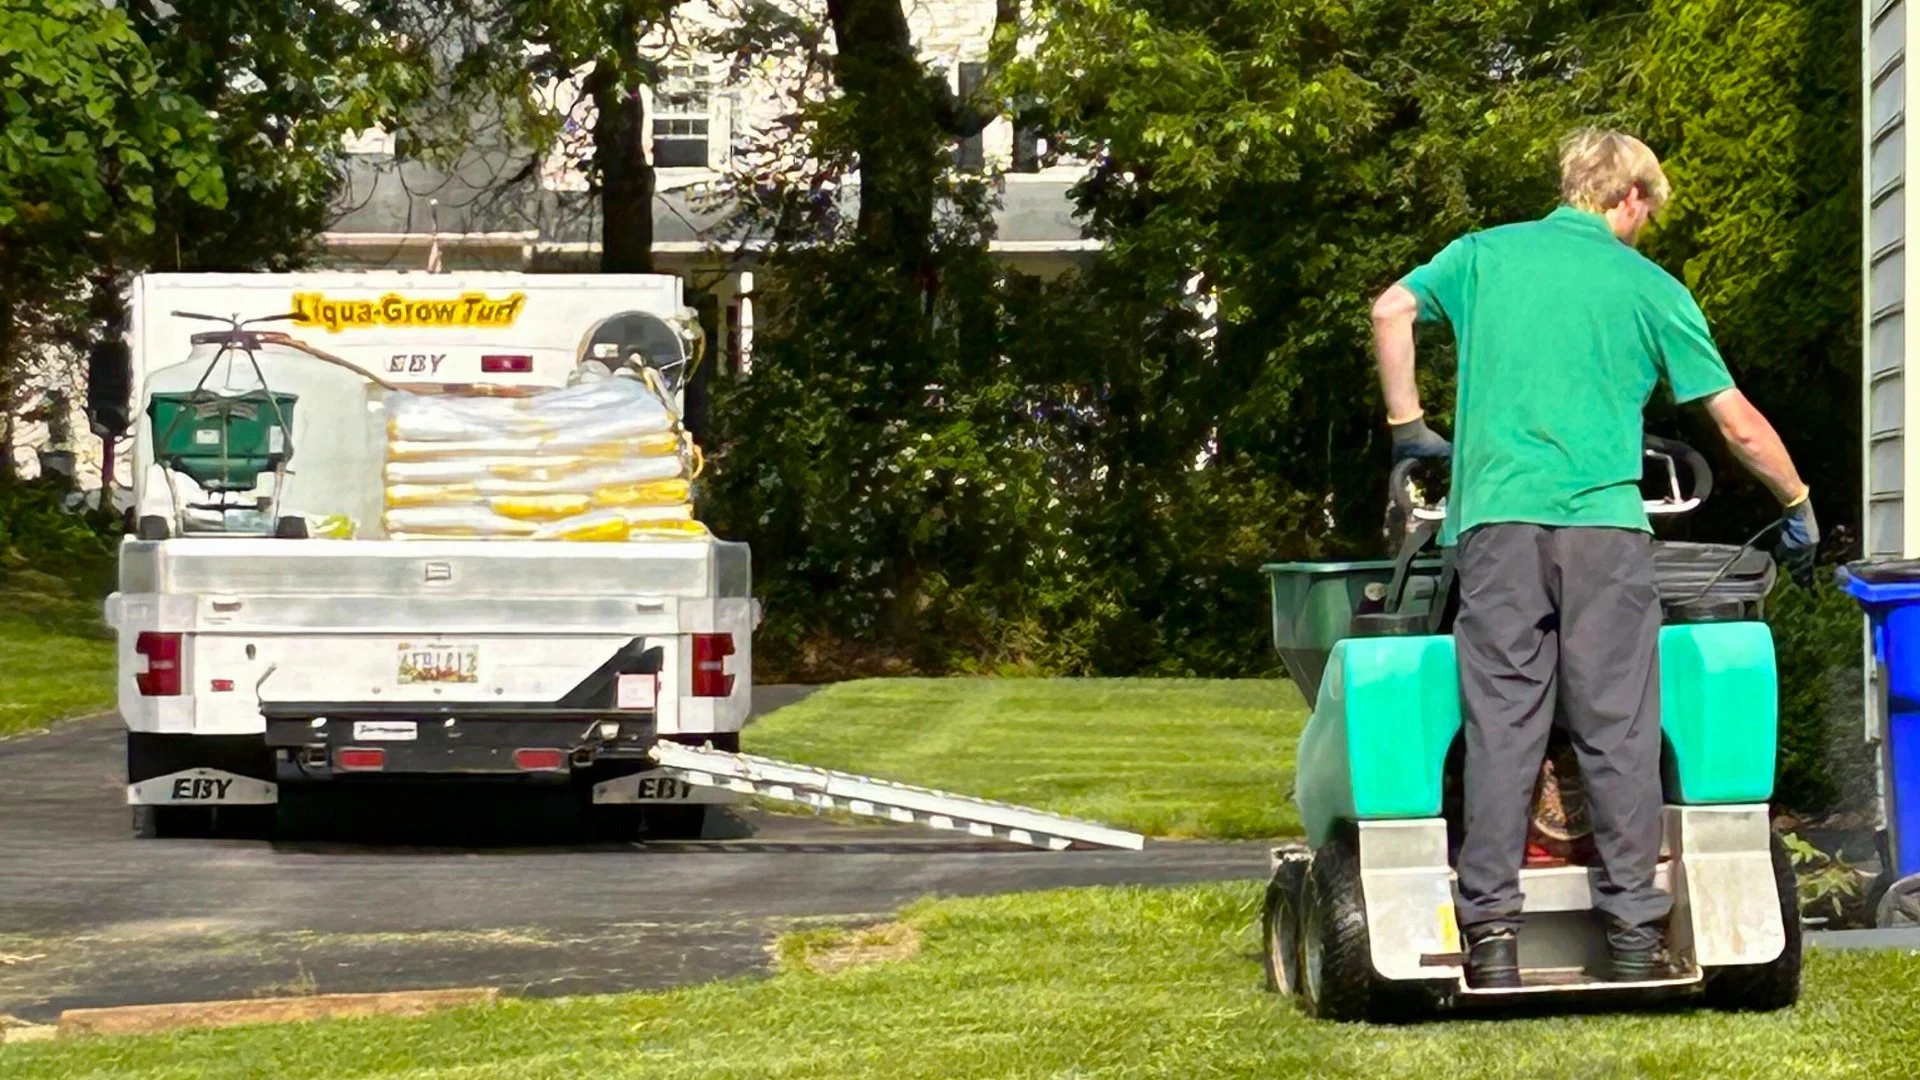 Lawn care and pest control employee working.